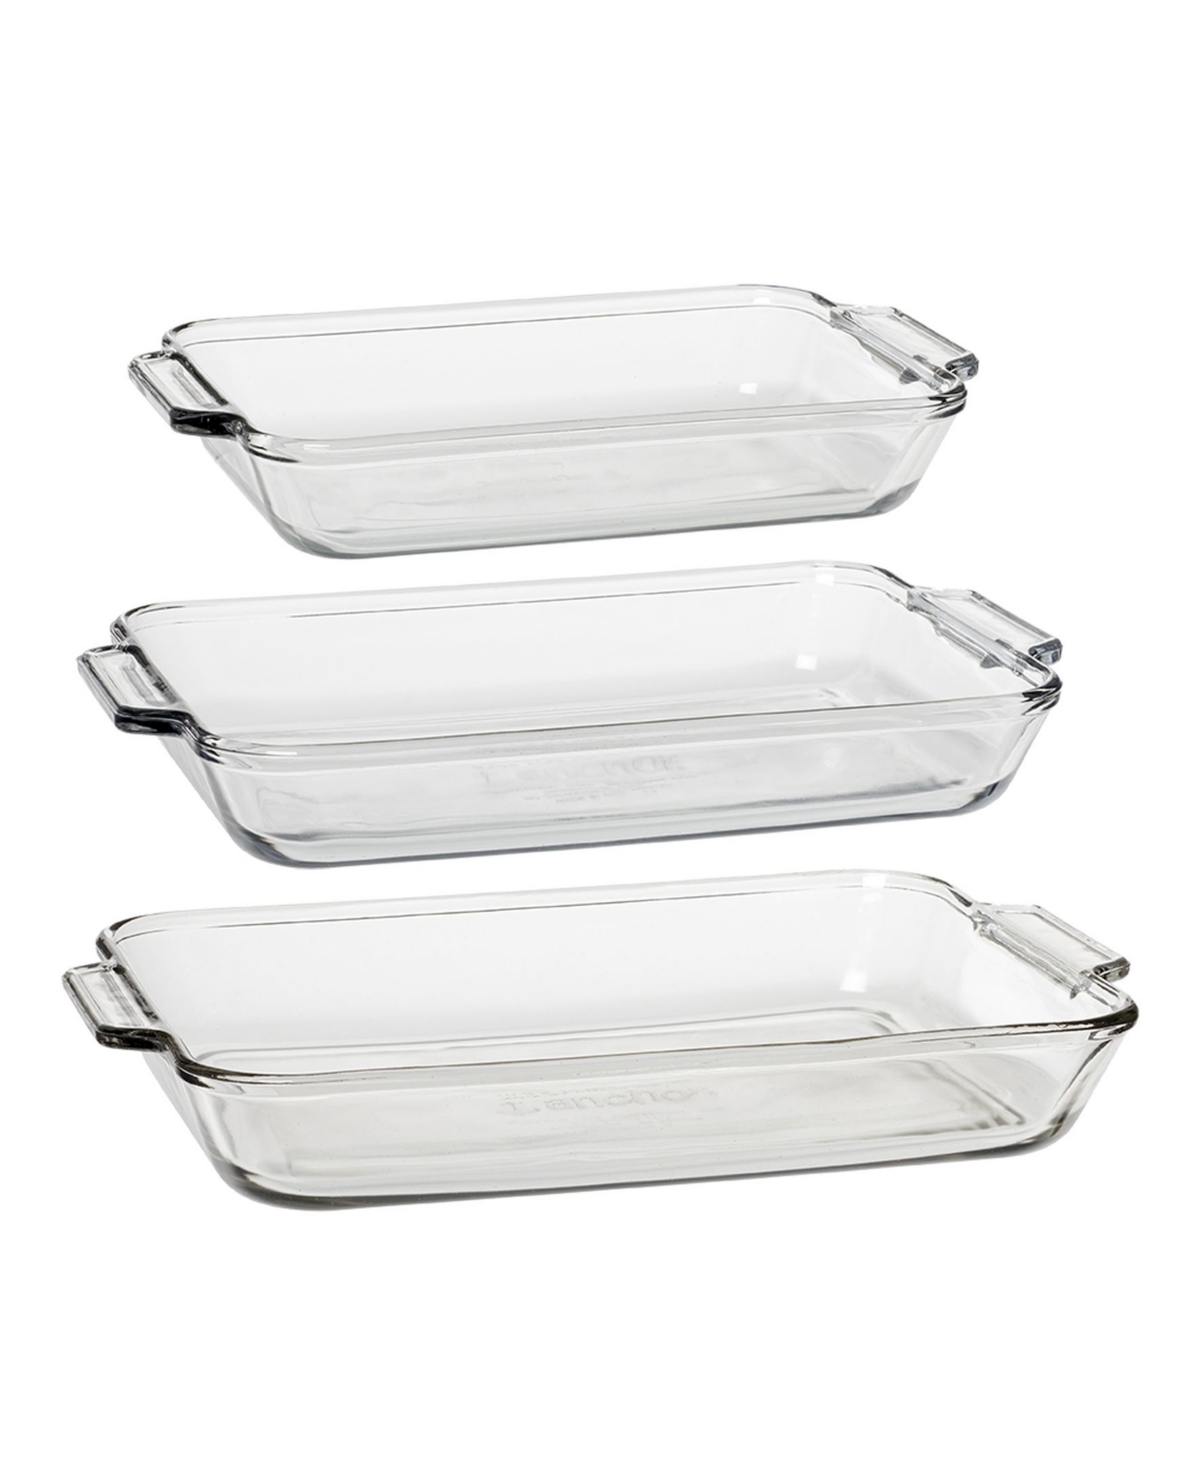 Anchor Hocking 3 Pc. Glass Oven Basics Bakeware Set In Clear